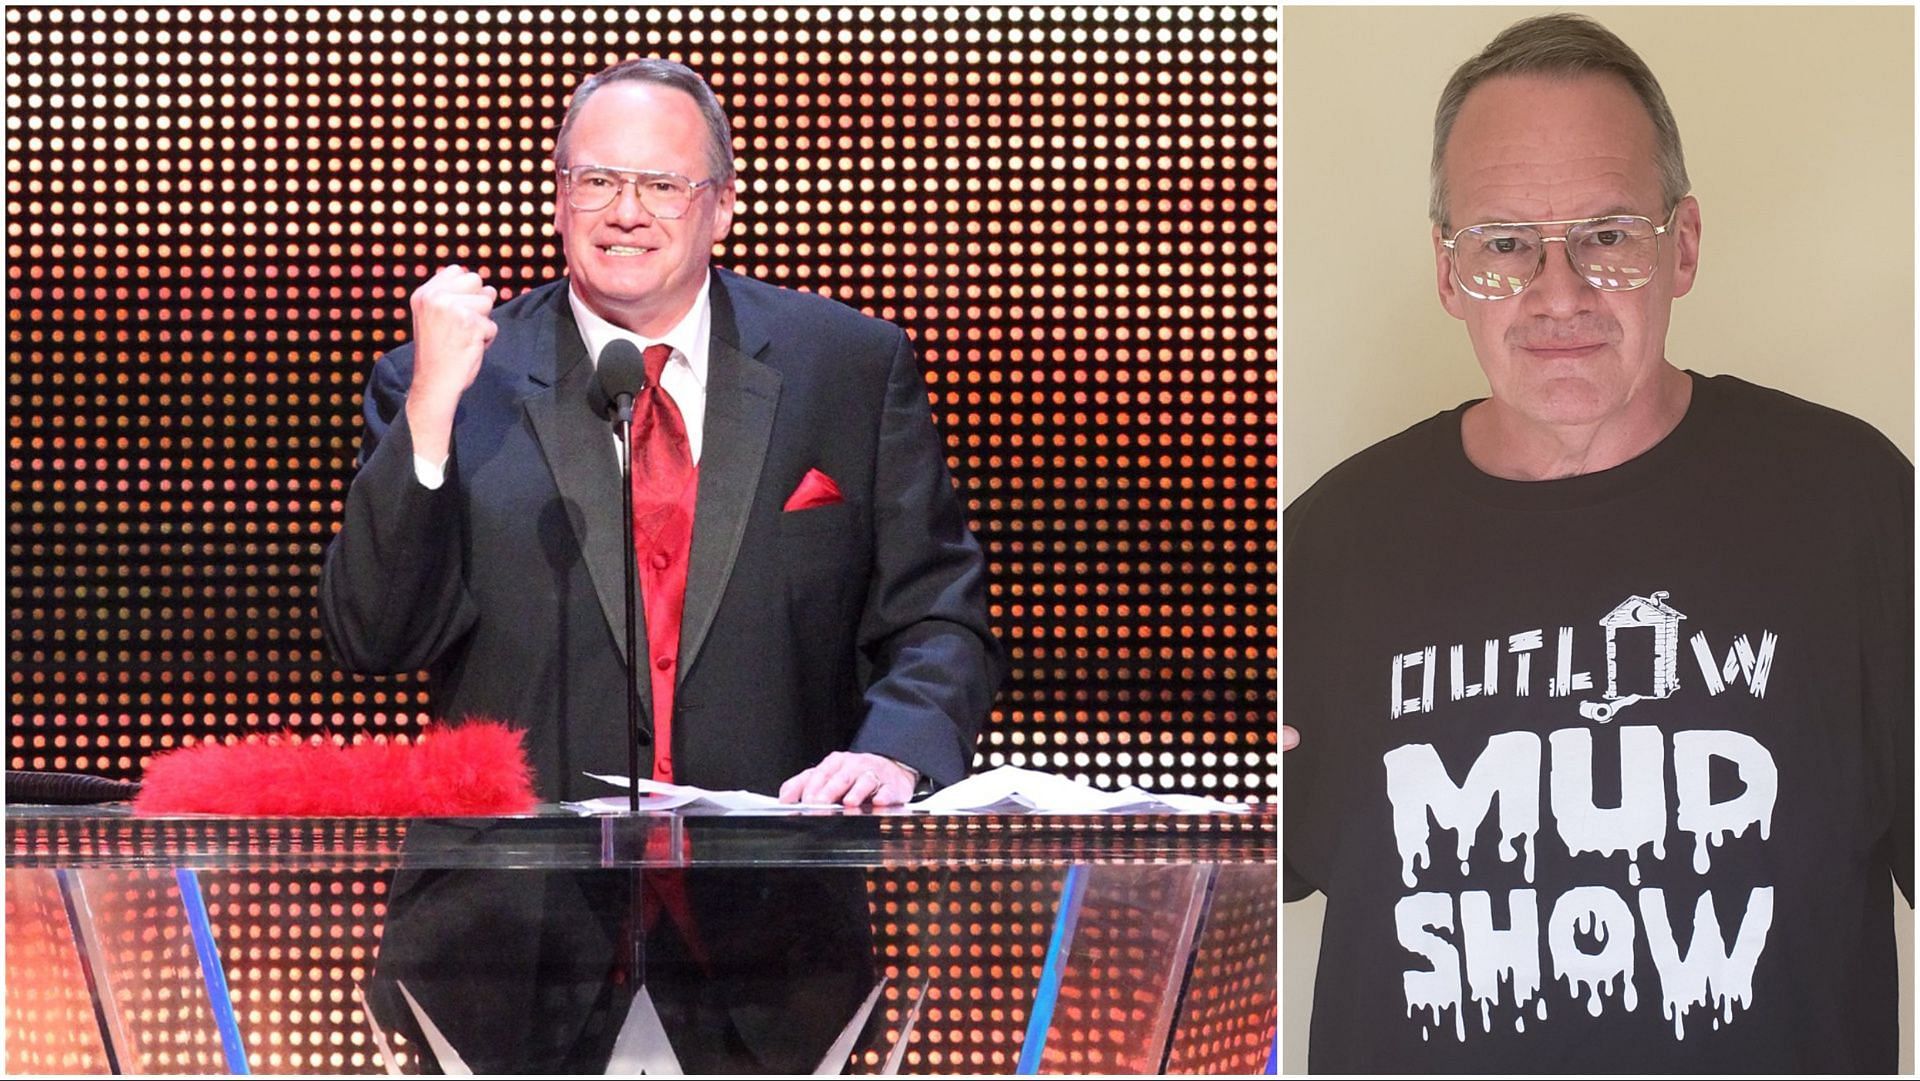 Jim Cornette inducts The R&amp;R Express into the WWE Hall of Fame, Cornette with his Outlaw Mud Show t-shirt